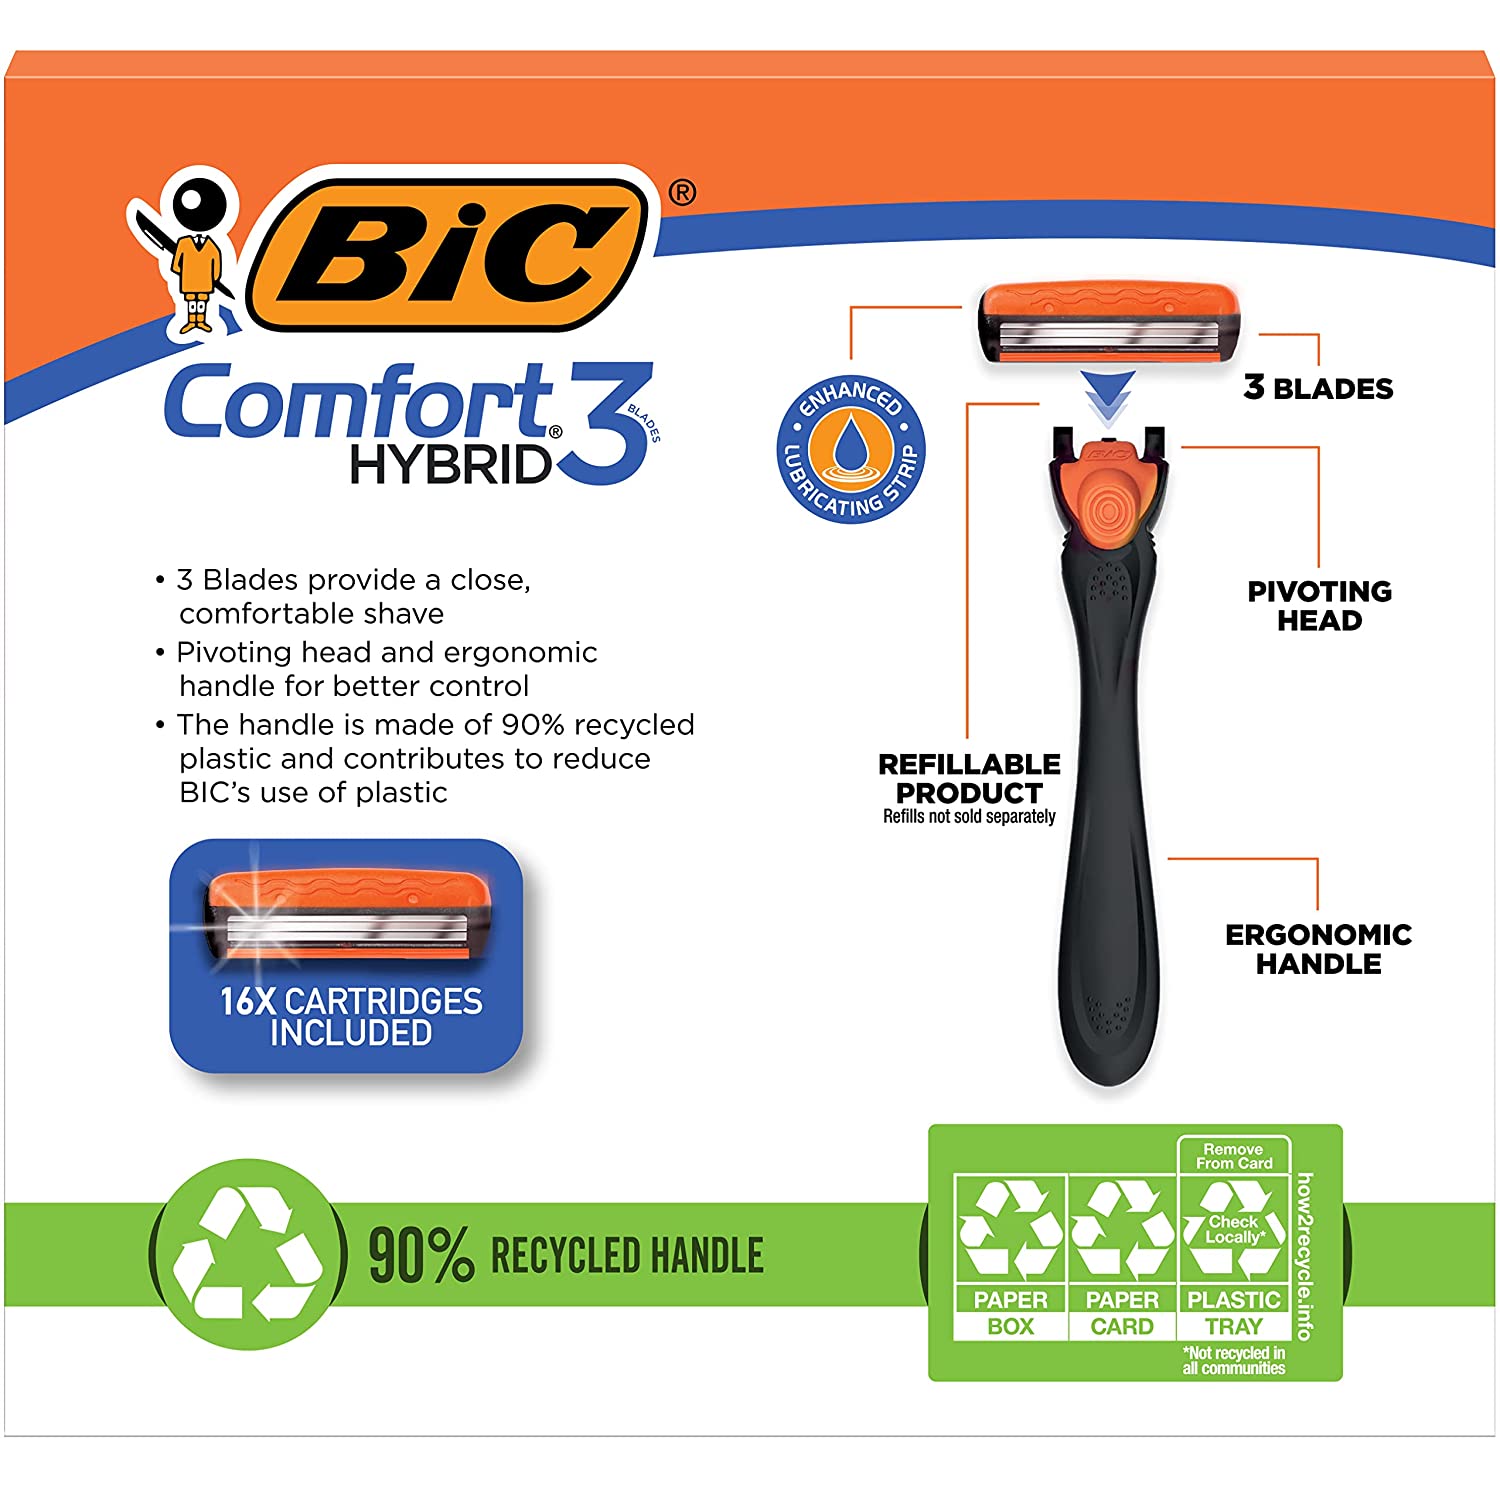 ($15 Value) BIC Holiday Gift Set, Comfort 3 Hybrid Disposable Razors for Men, 3 Blade, 1 Handle and 16 Cartridges - image 2 of 2